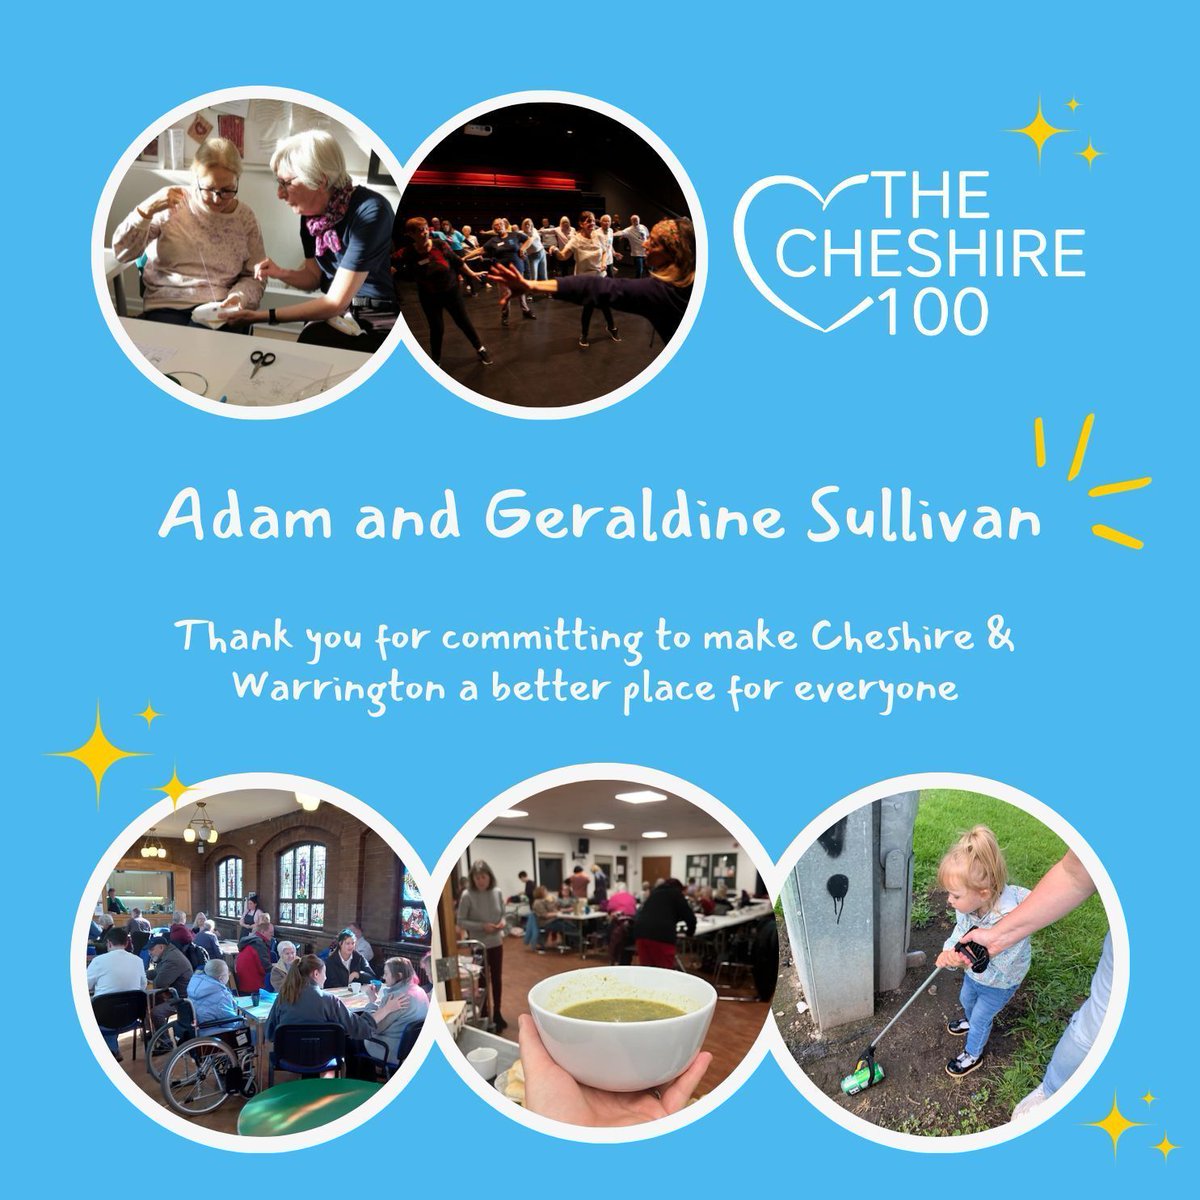 Welcome to the Cheshire 100 Supporters Club Adam & Geraldine Sullivan ✨ Our individual donors allow CCF to build a happier, fairer and stronger county for all. Thank you so much for your support #CCF #Cheshire